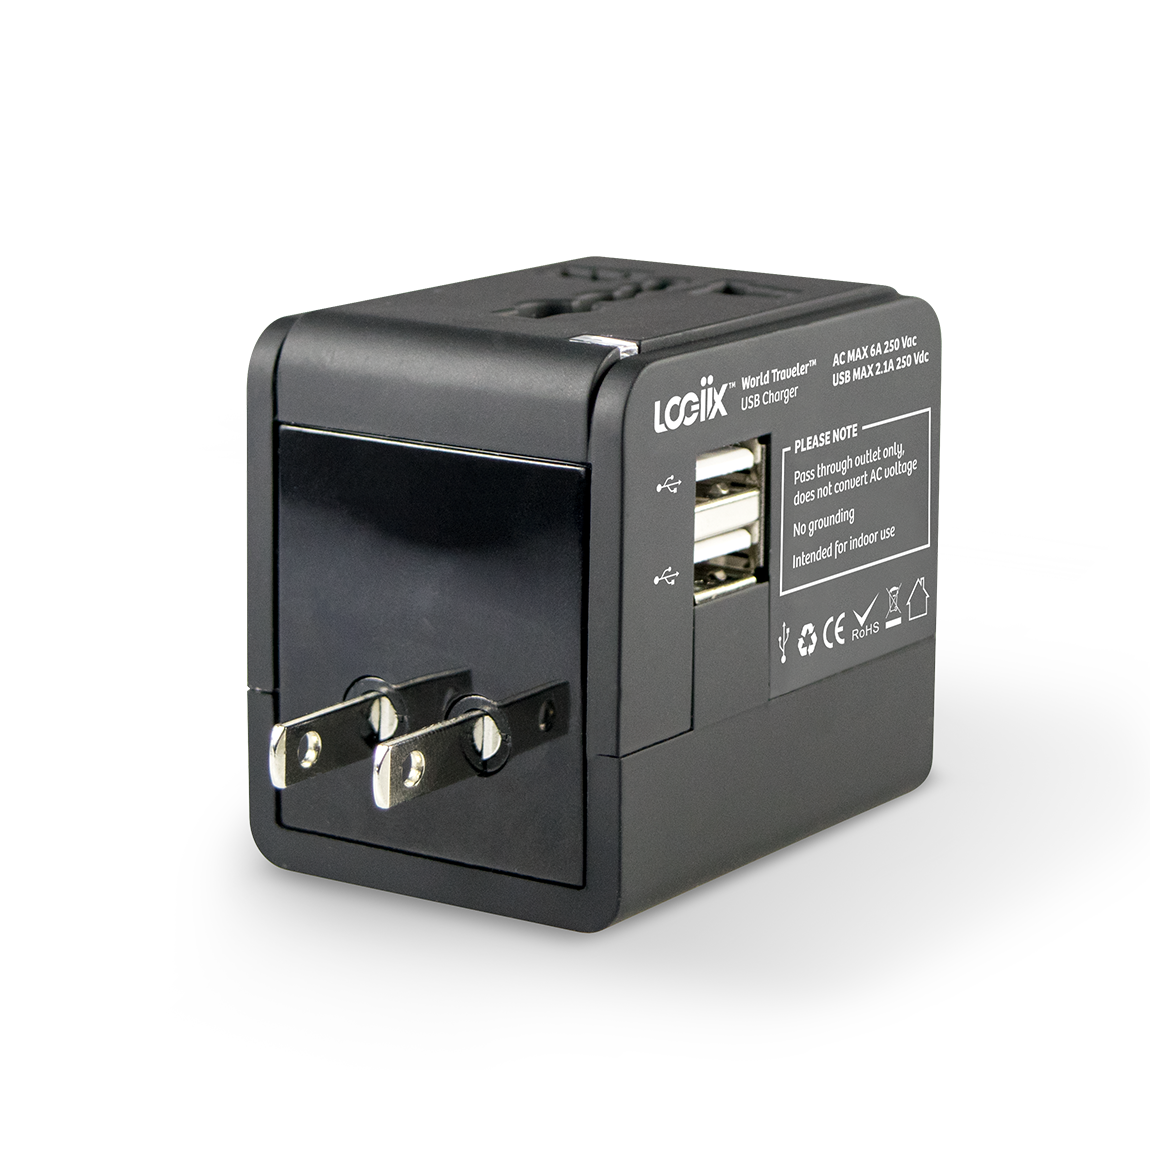 This is a black universal travel adapter. It works in the UK, Europe & USA/Australia. This travel adapter comes with a universal plug adapter for use in over 150 countries. Comes with a built in USB charger.